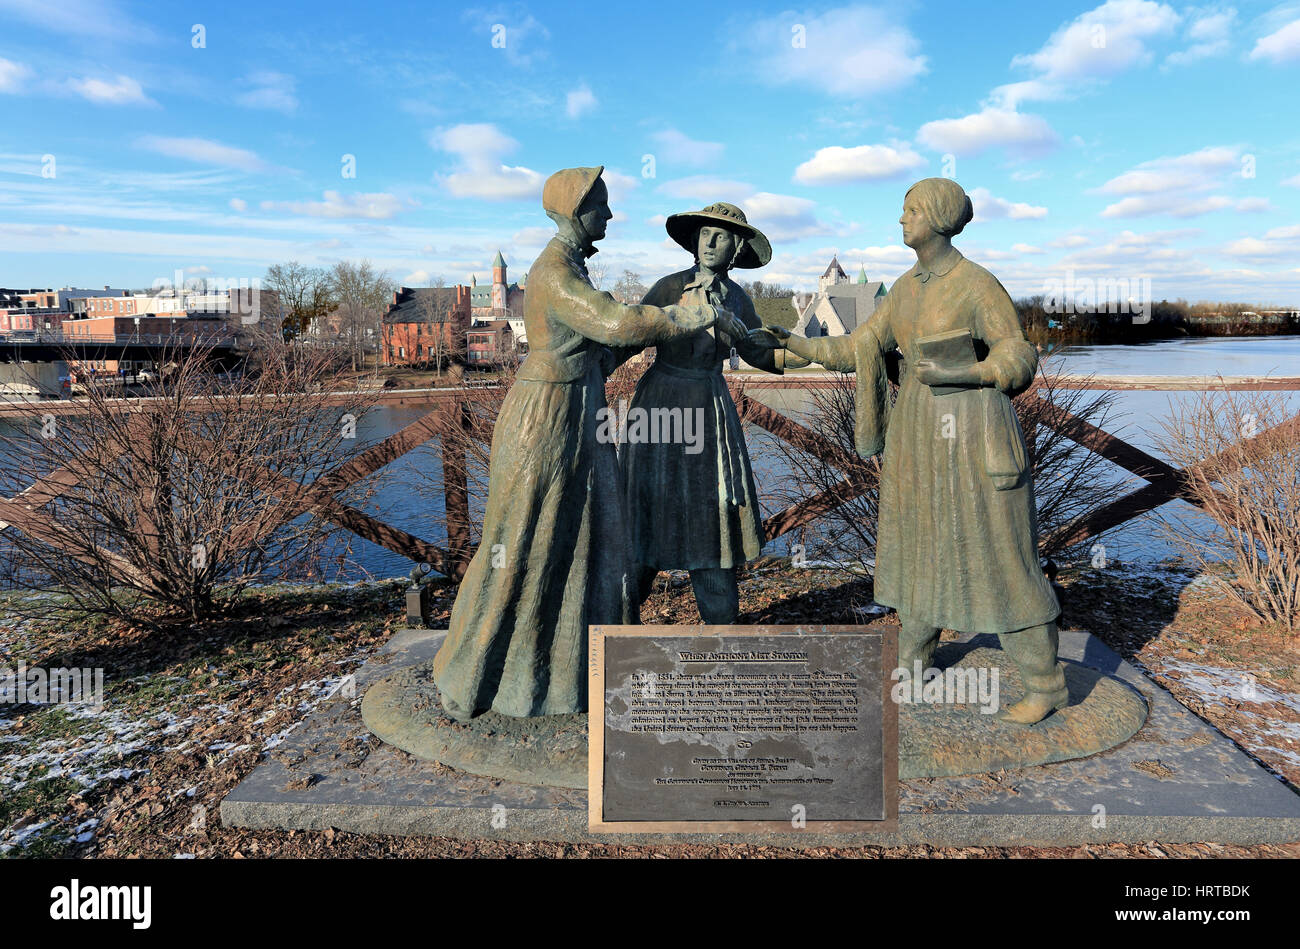 Sculpture depicting May 1851 chance meeting of Elizabeth Caty Stanton and Susan B. Anthony Seneca Falls New York birthplace of the women's right movem Stock Photo